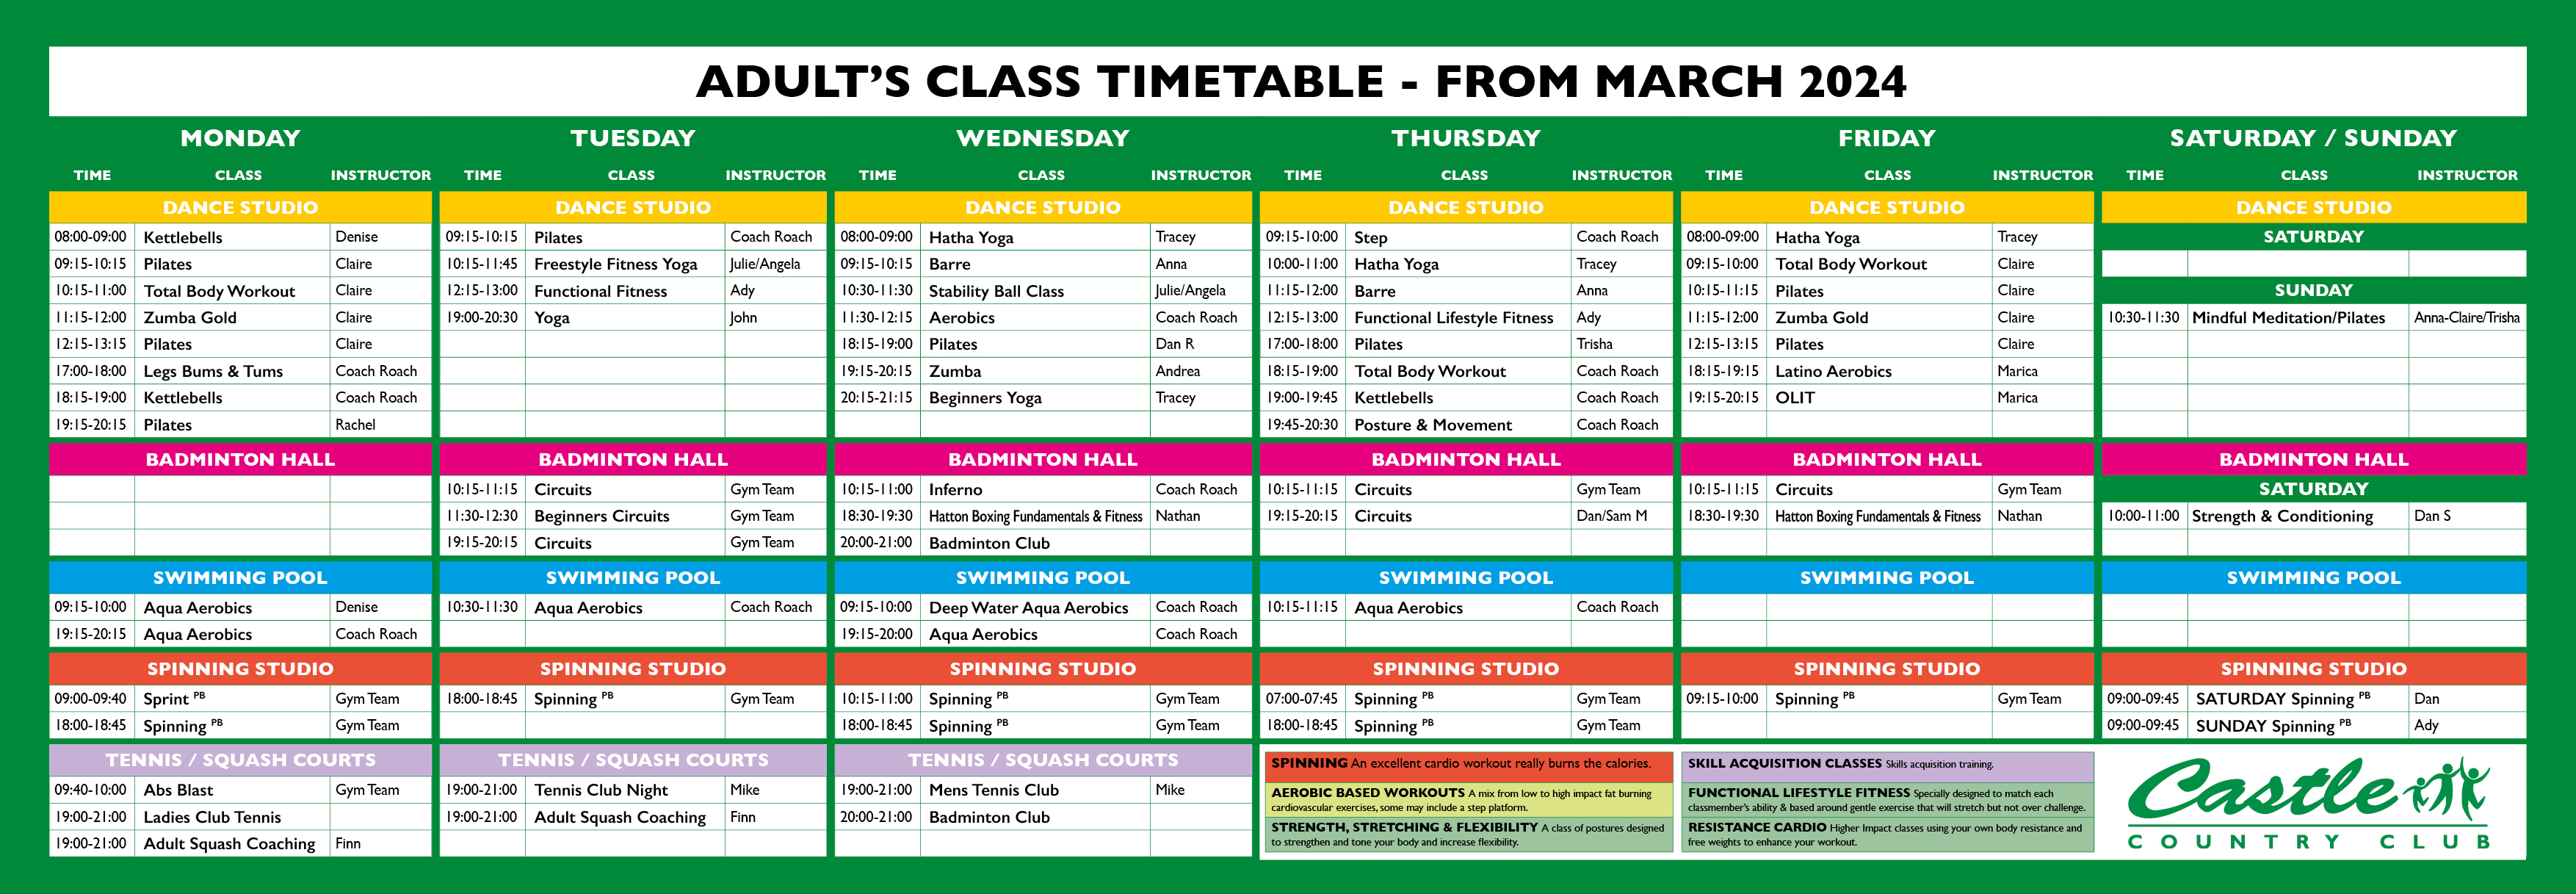 CCC Timetable Adults March 2024